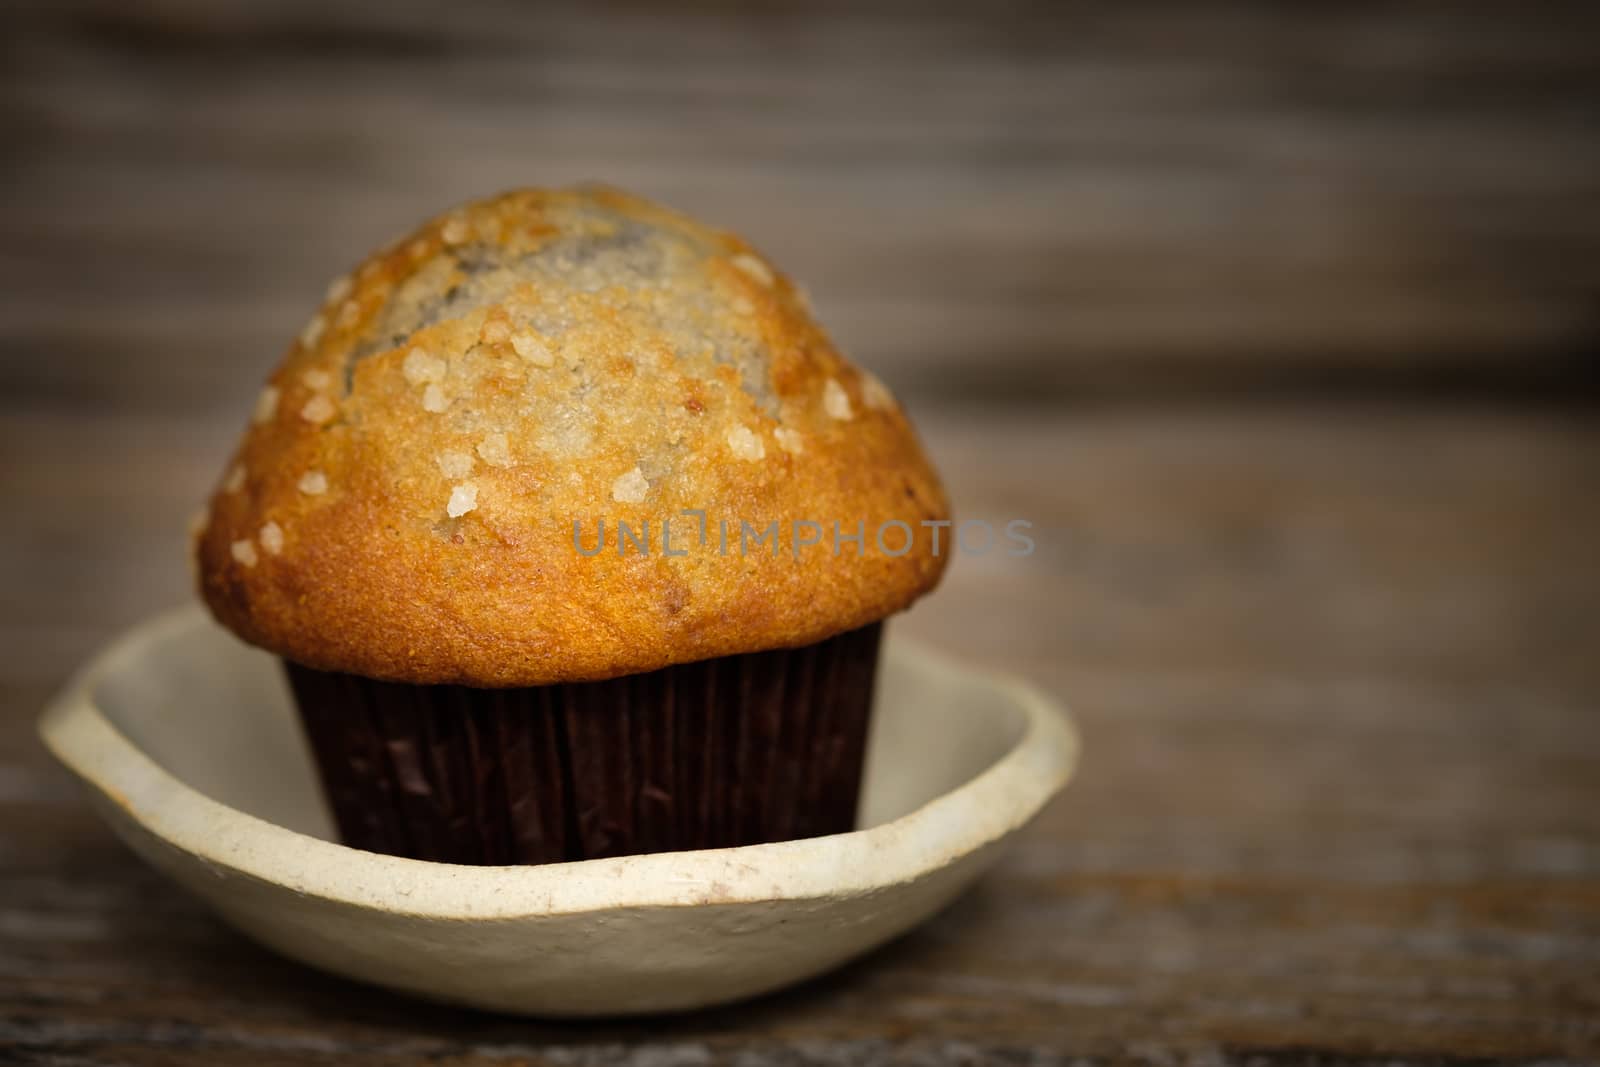 Still life blueberry muffins in a rustic style. Select the focus point.